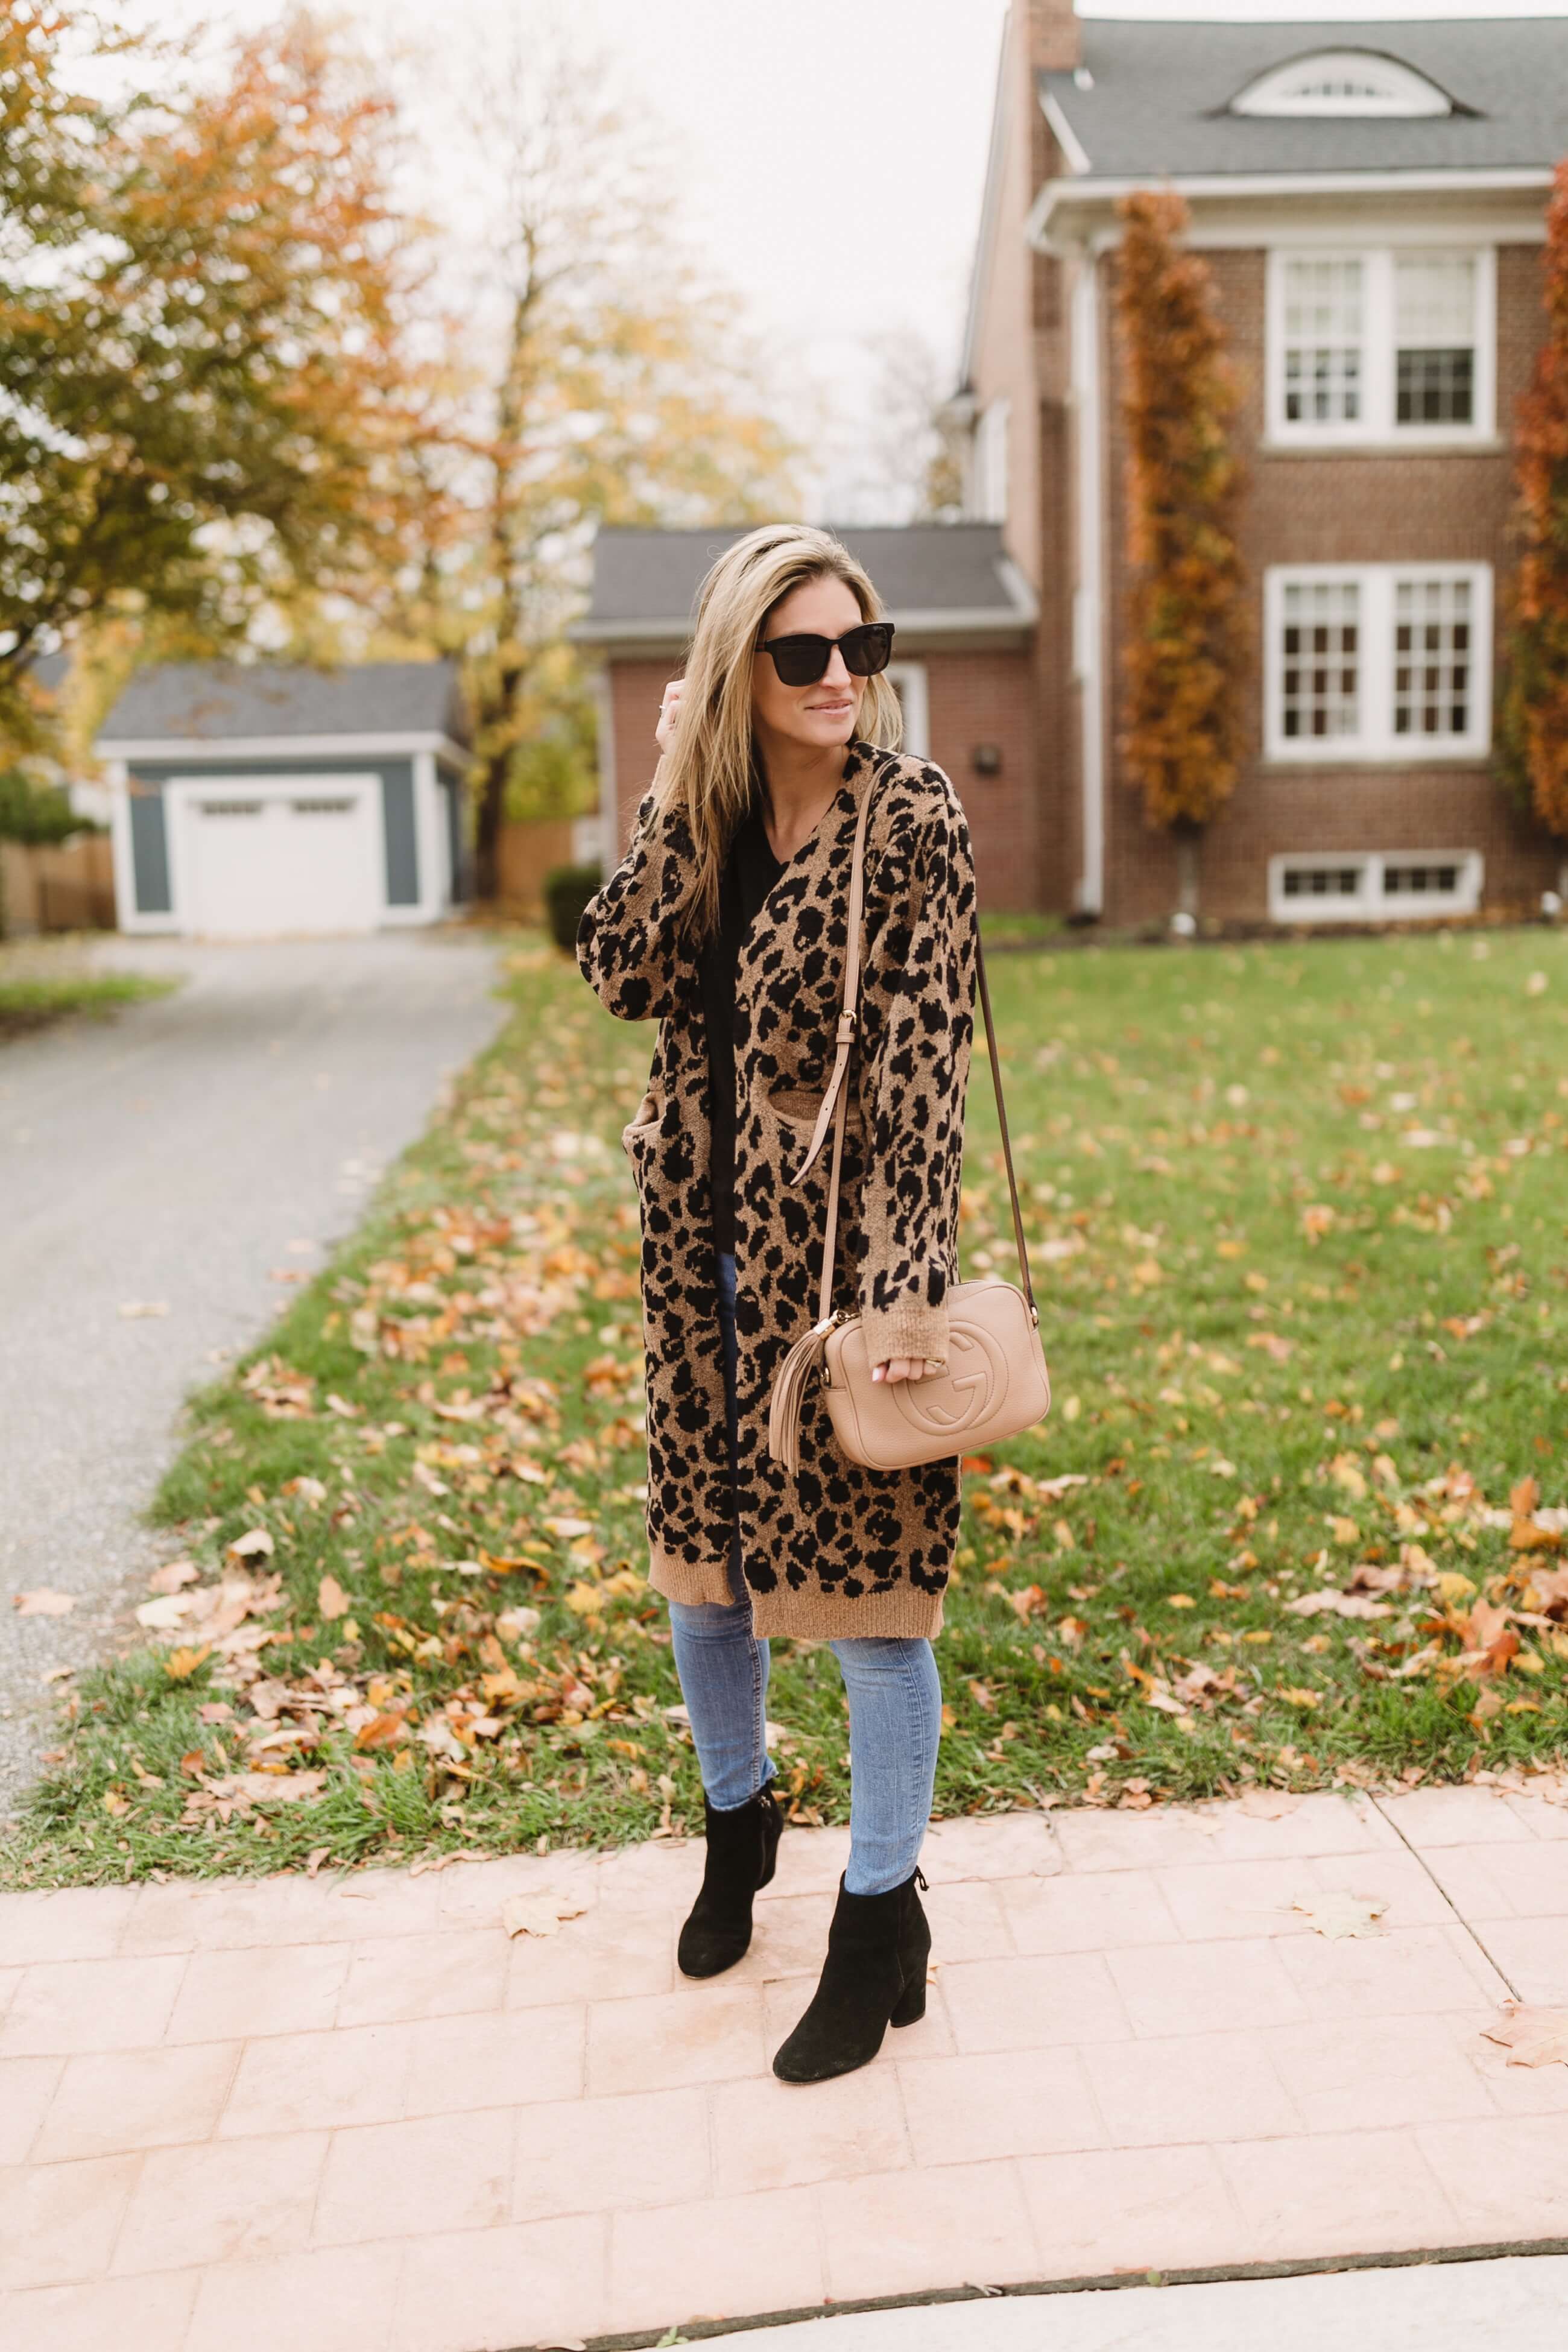 Leopard Chicwish sweater with pockets; winter style; winter longline cardigan Mandy FURNIS Whitby style blogger sparkleshinylove